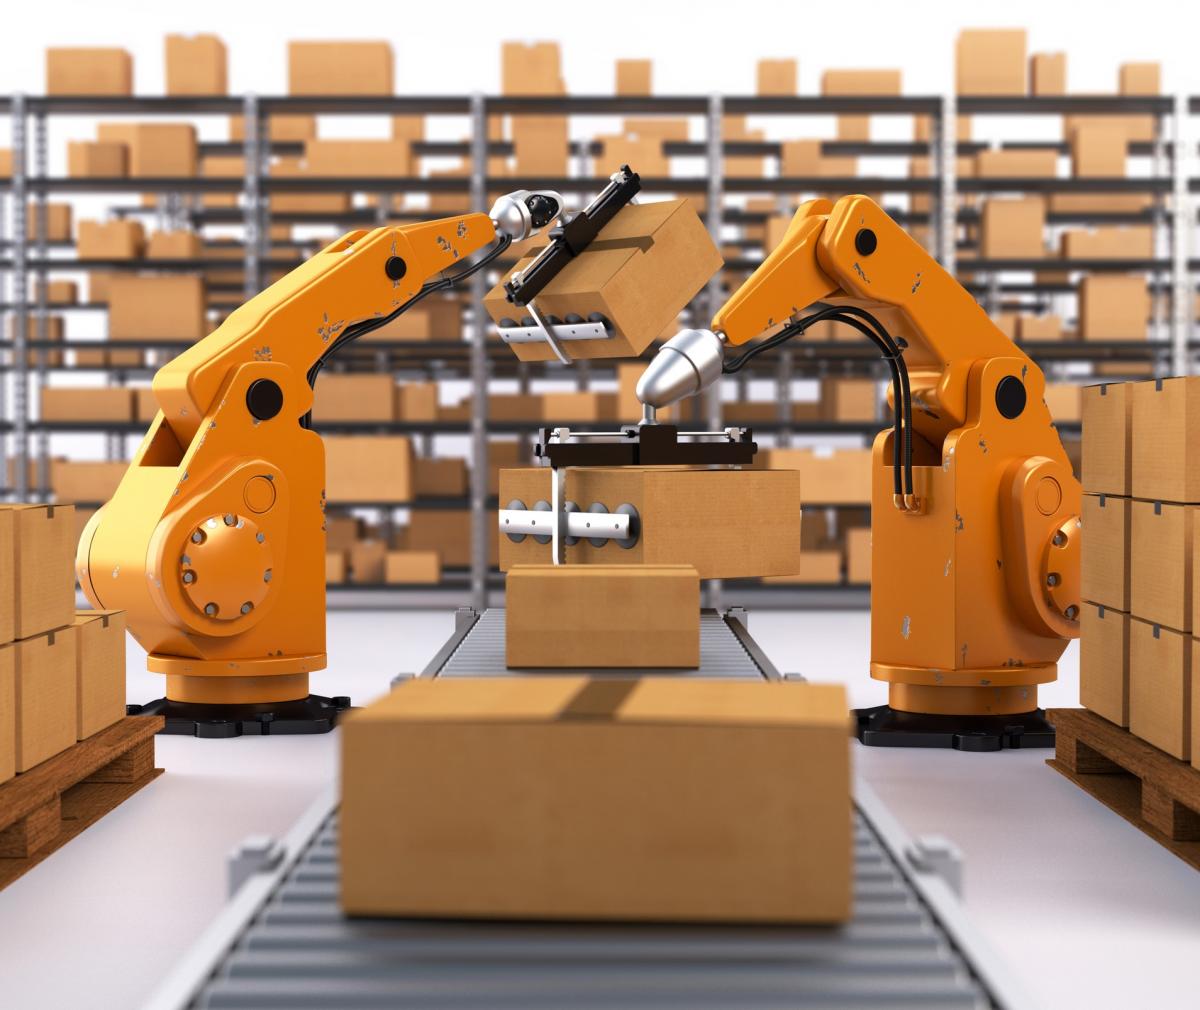 Palletizing robots have become indispensable to operations in many companies